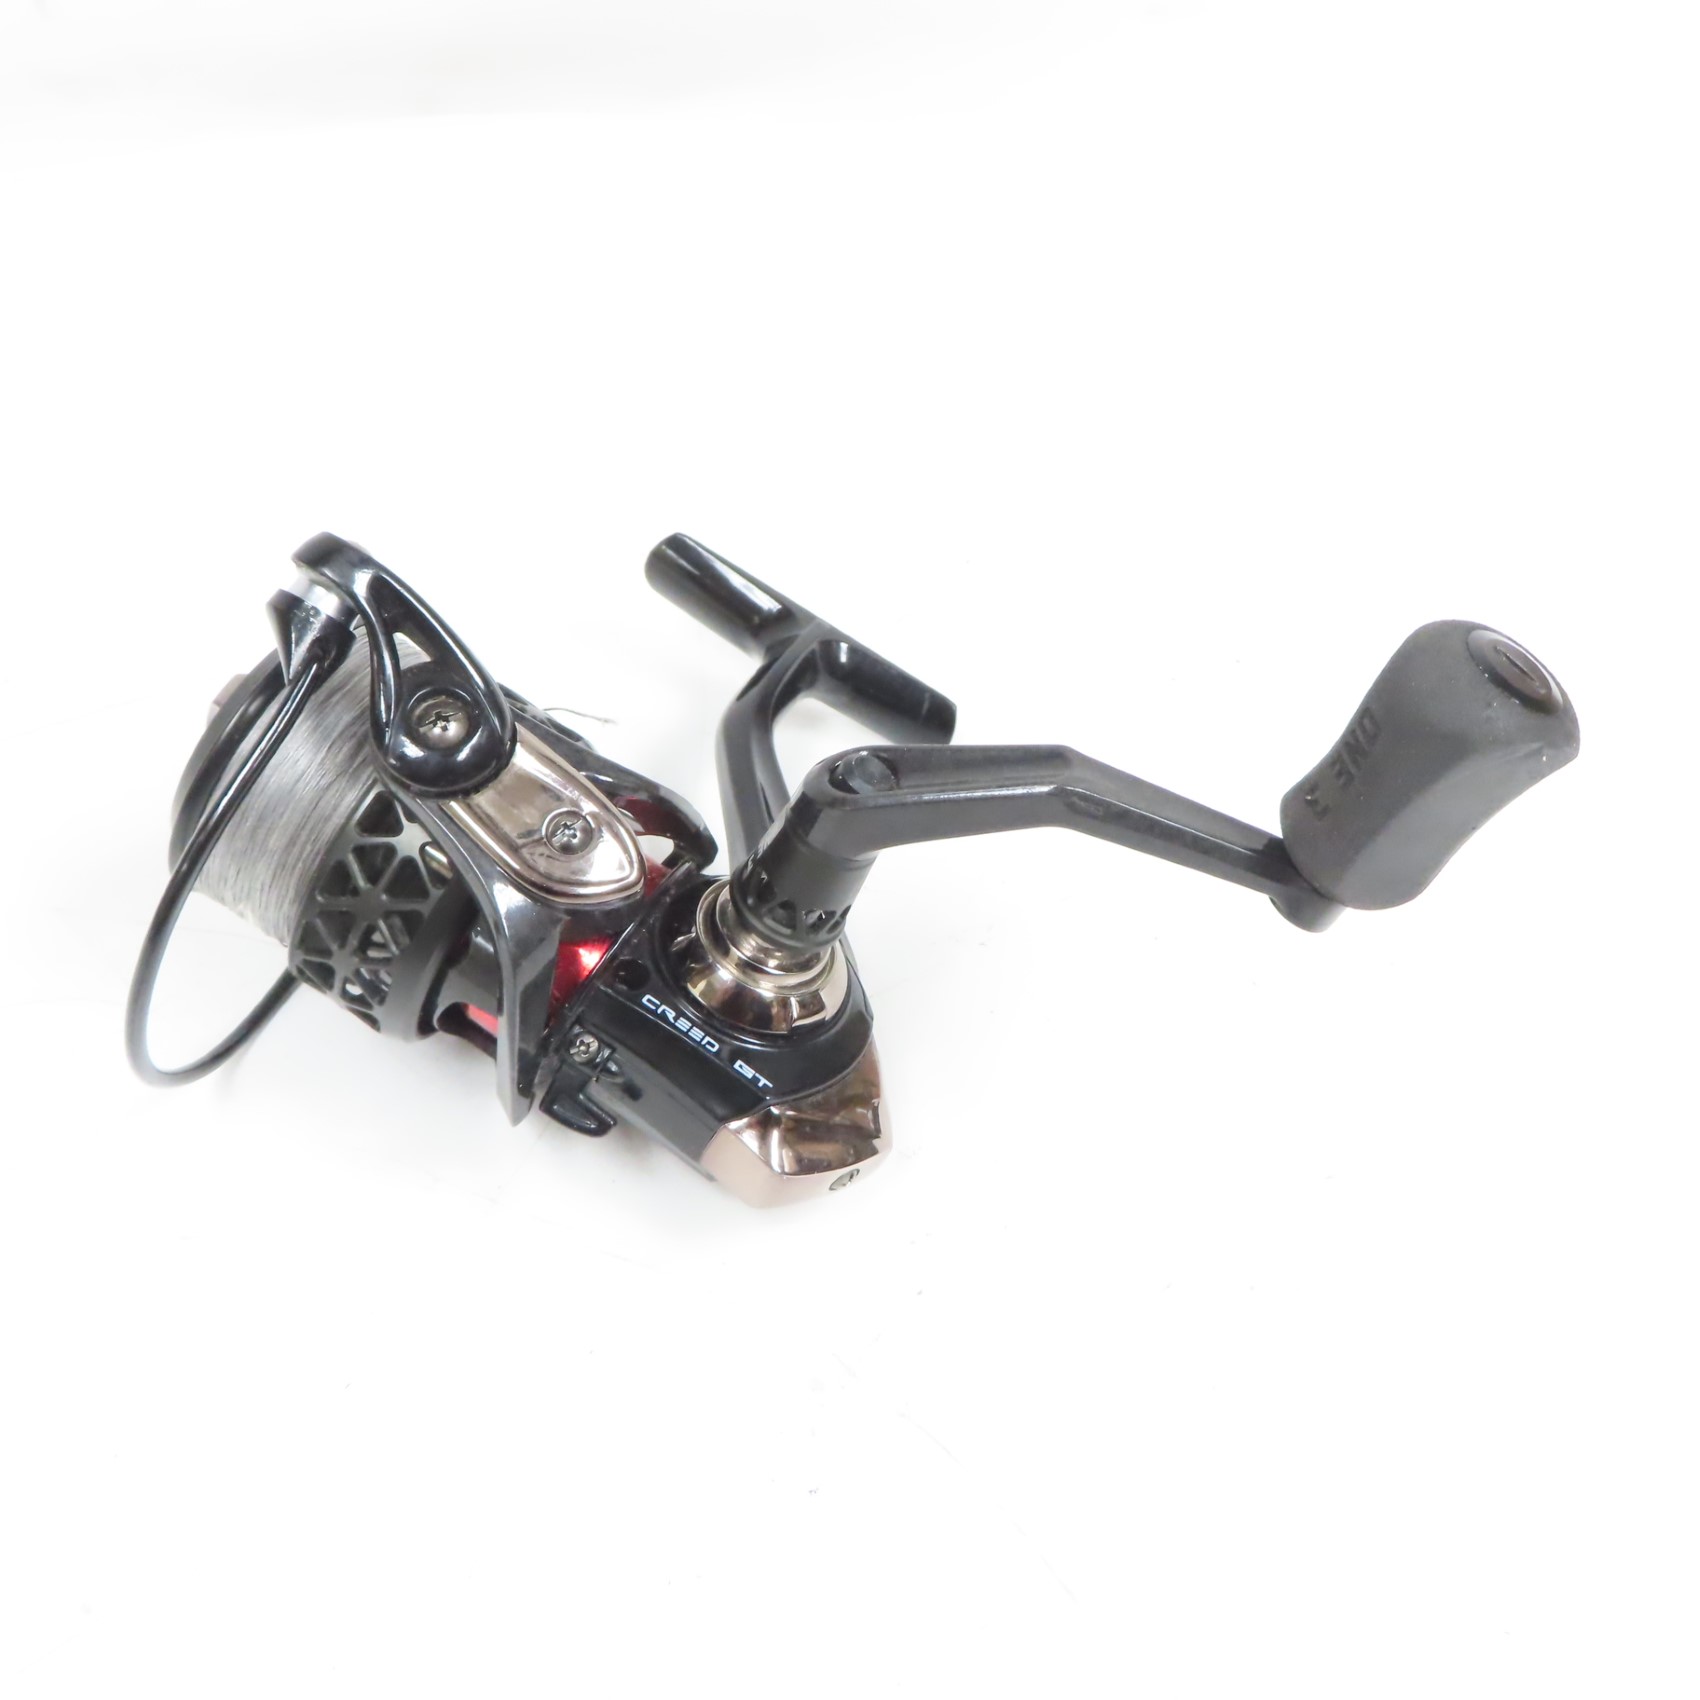 13 Fishing CRGT3000 Creed GT 3000 6.2:1 Right-Hand Spinning Fishing Reel